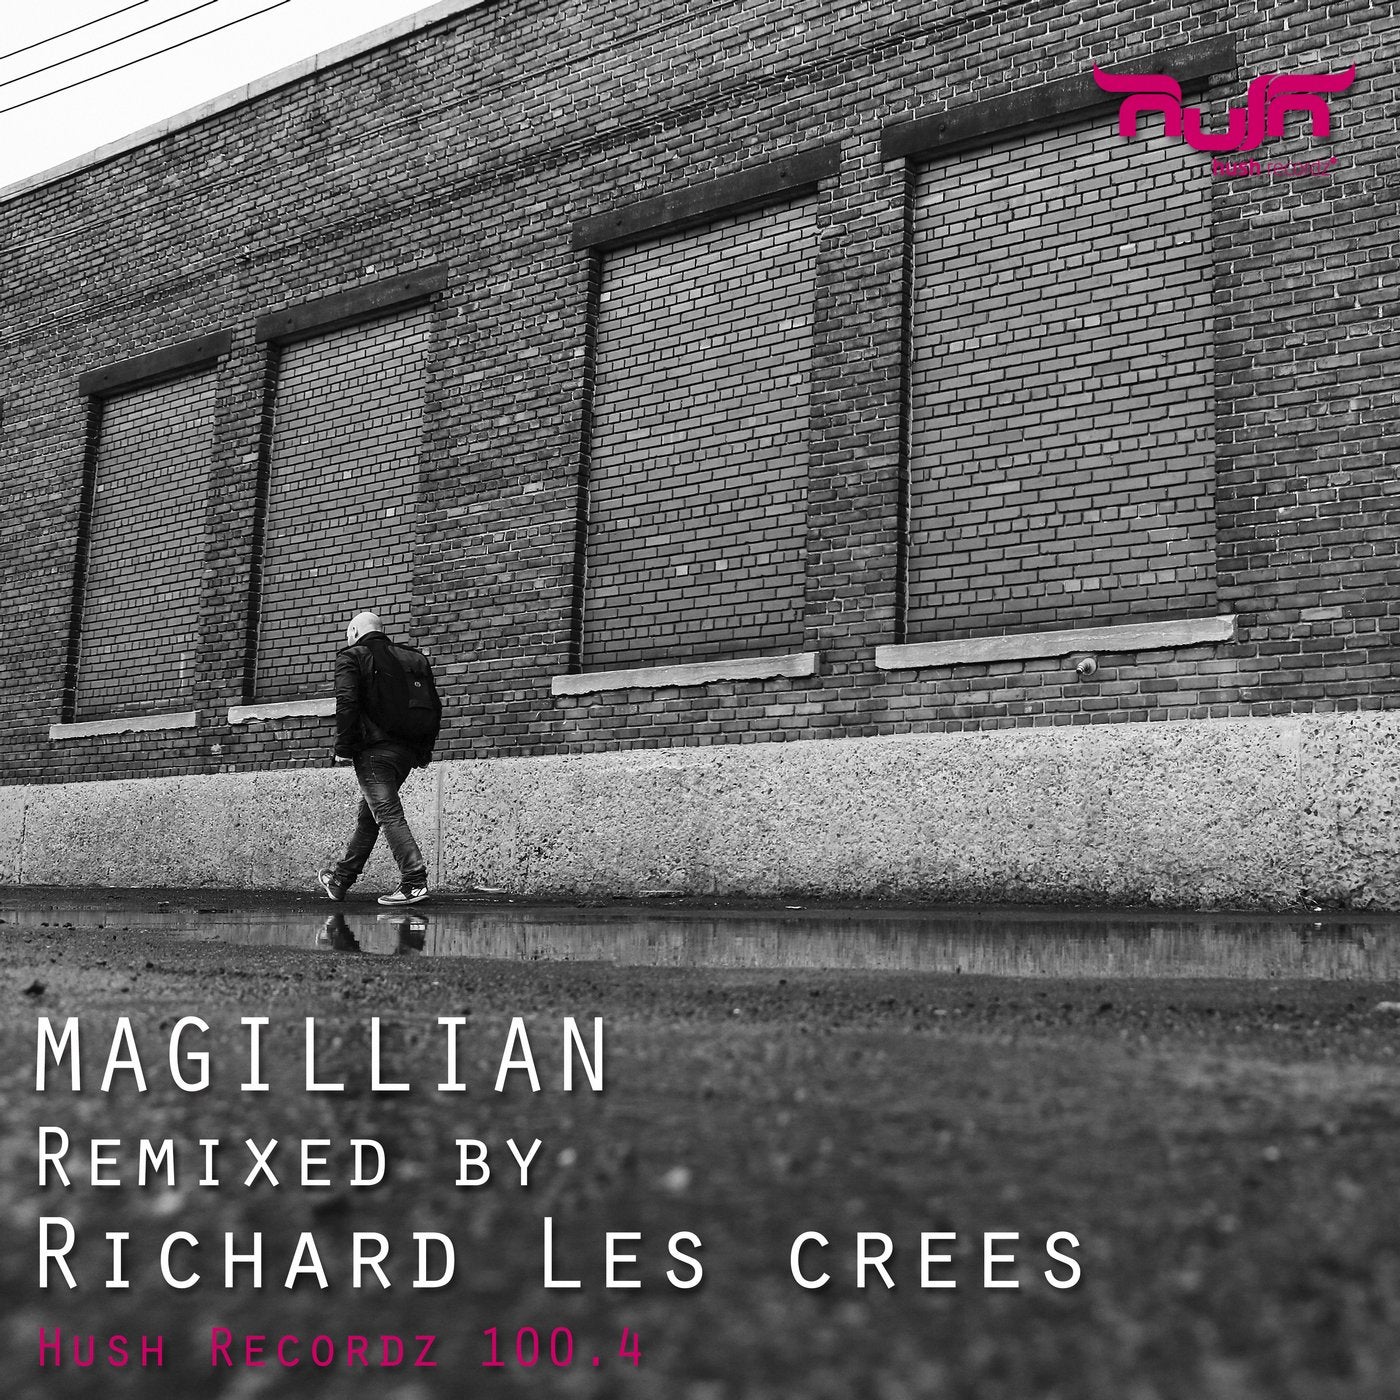 Remixed by Richard Les Crees